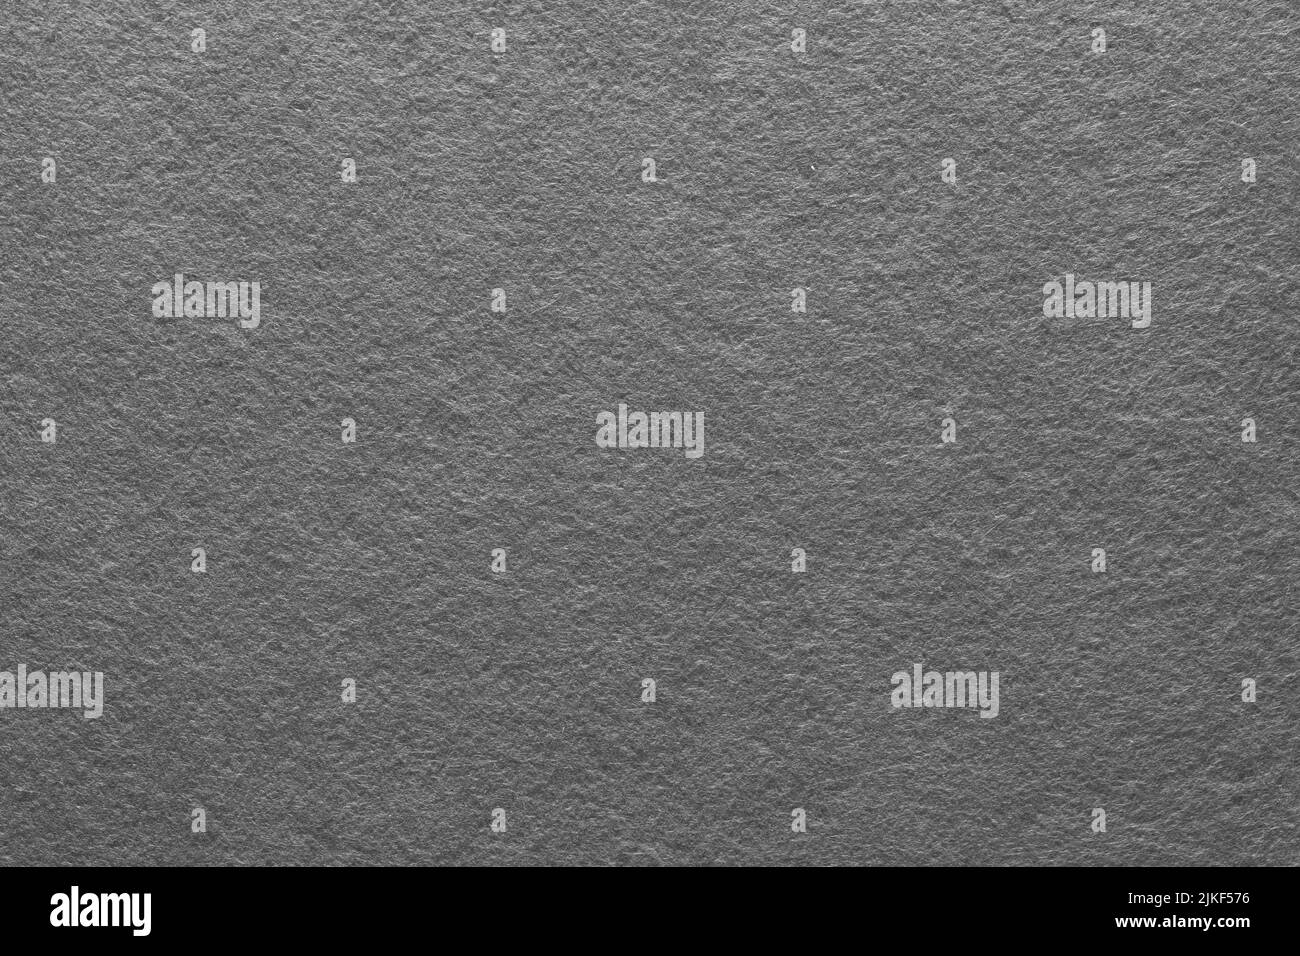 Art Paper Texture For Background In Black Stock Photo - Download